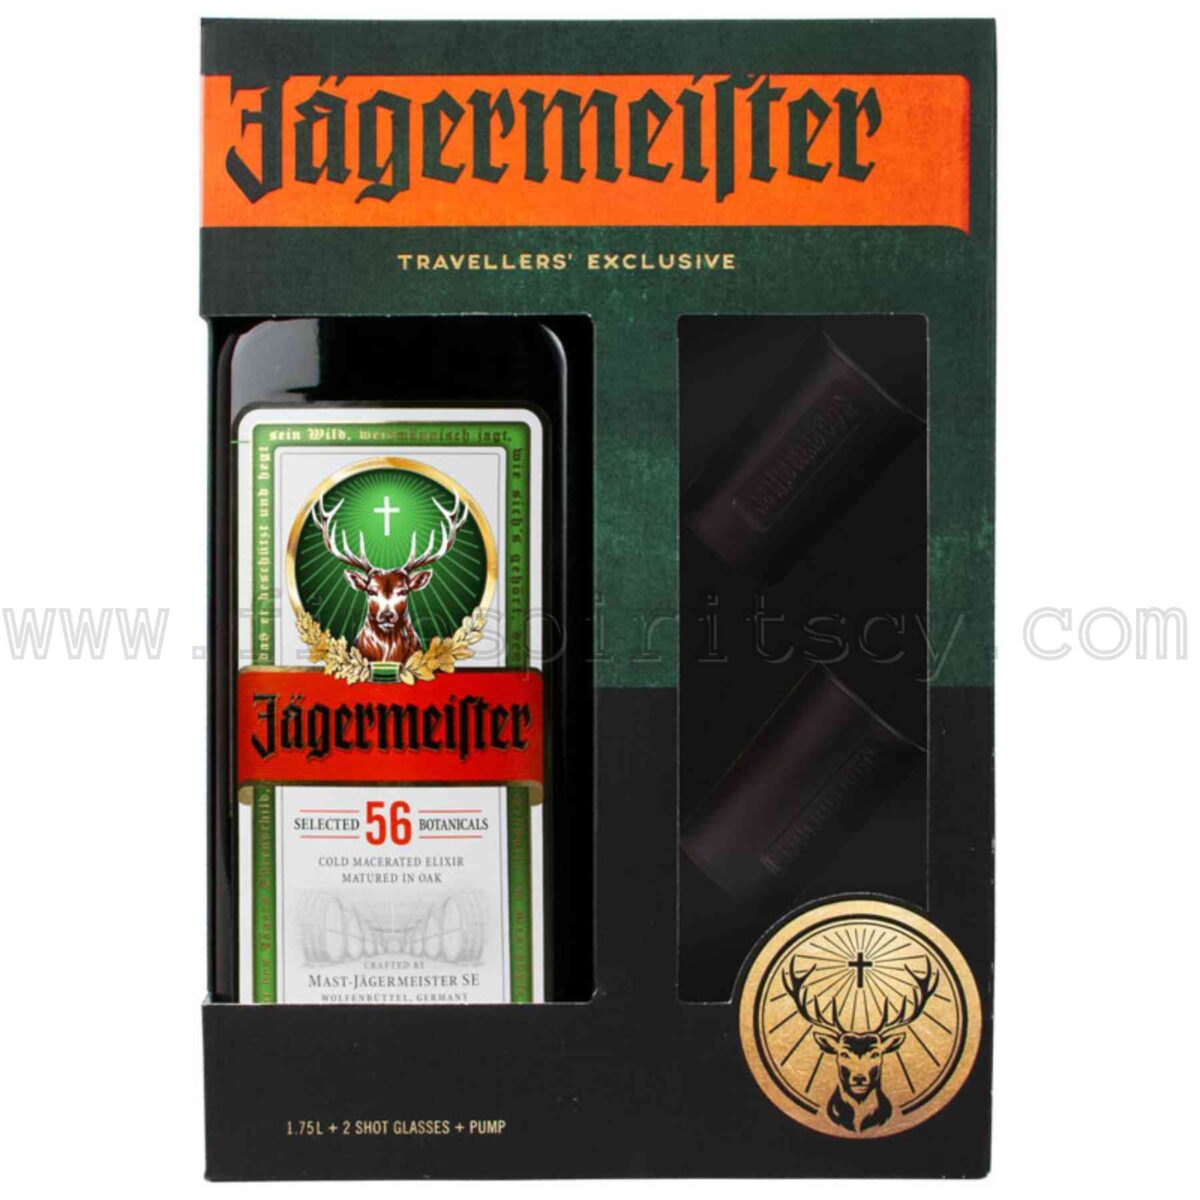 Jagermeister Party Box 1750ml 1.75L 175cl With 2 Ceramic Shot Glasses And Pump